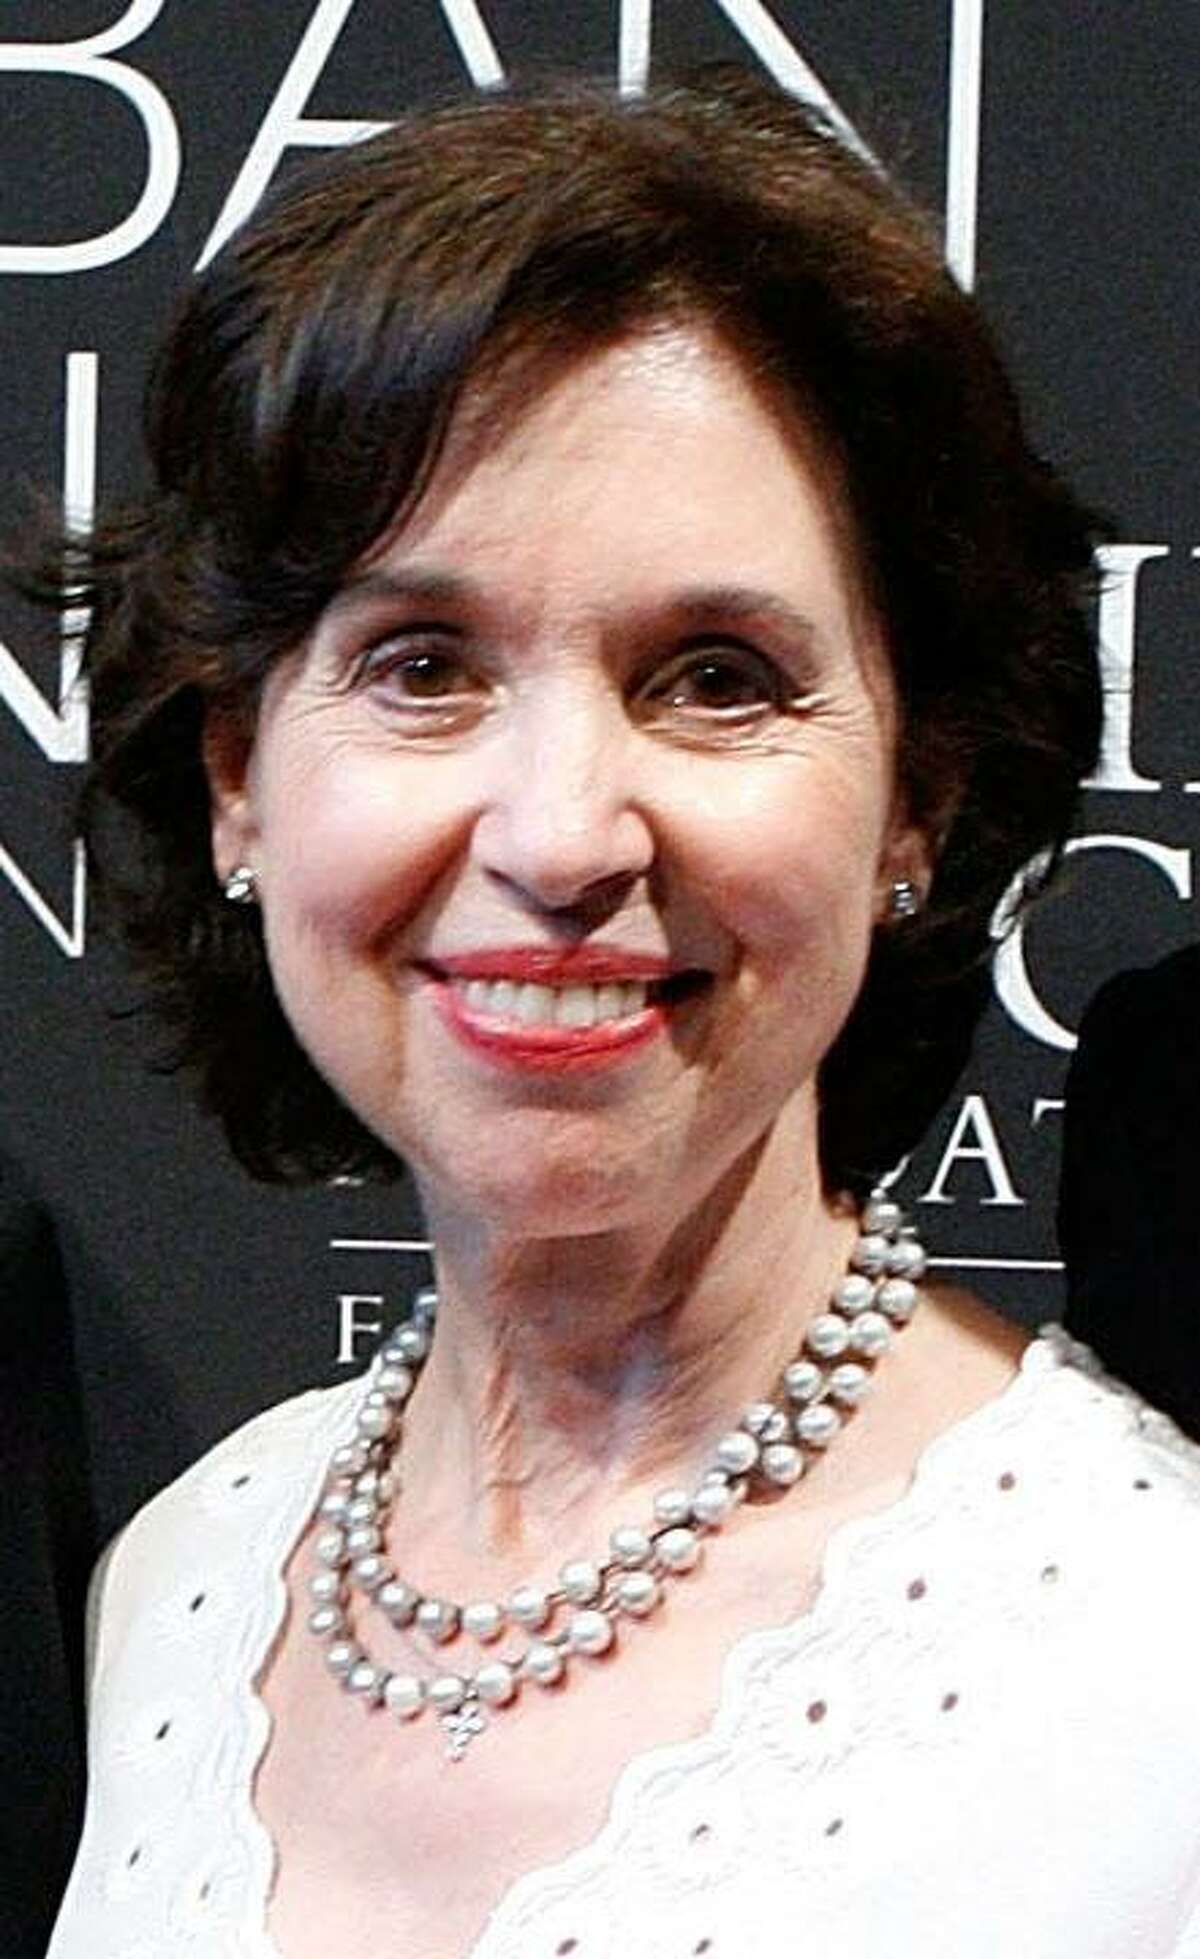 Barbara Dalio attended the Operation Warrior Wellness launch at the Urban Zen Center At Stephan Weiss Studio on June 7, 2011 in New York City.